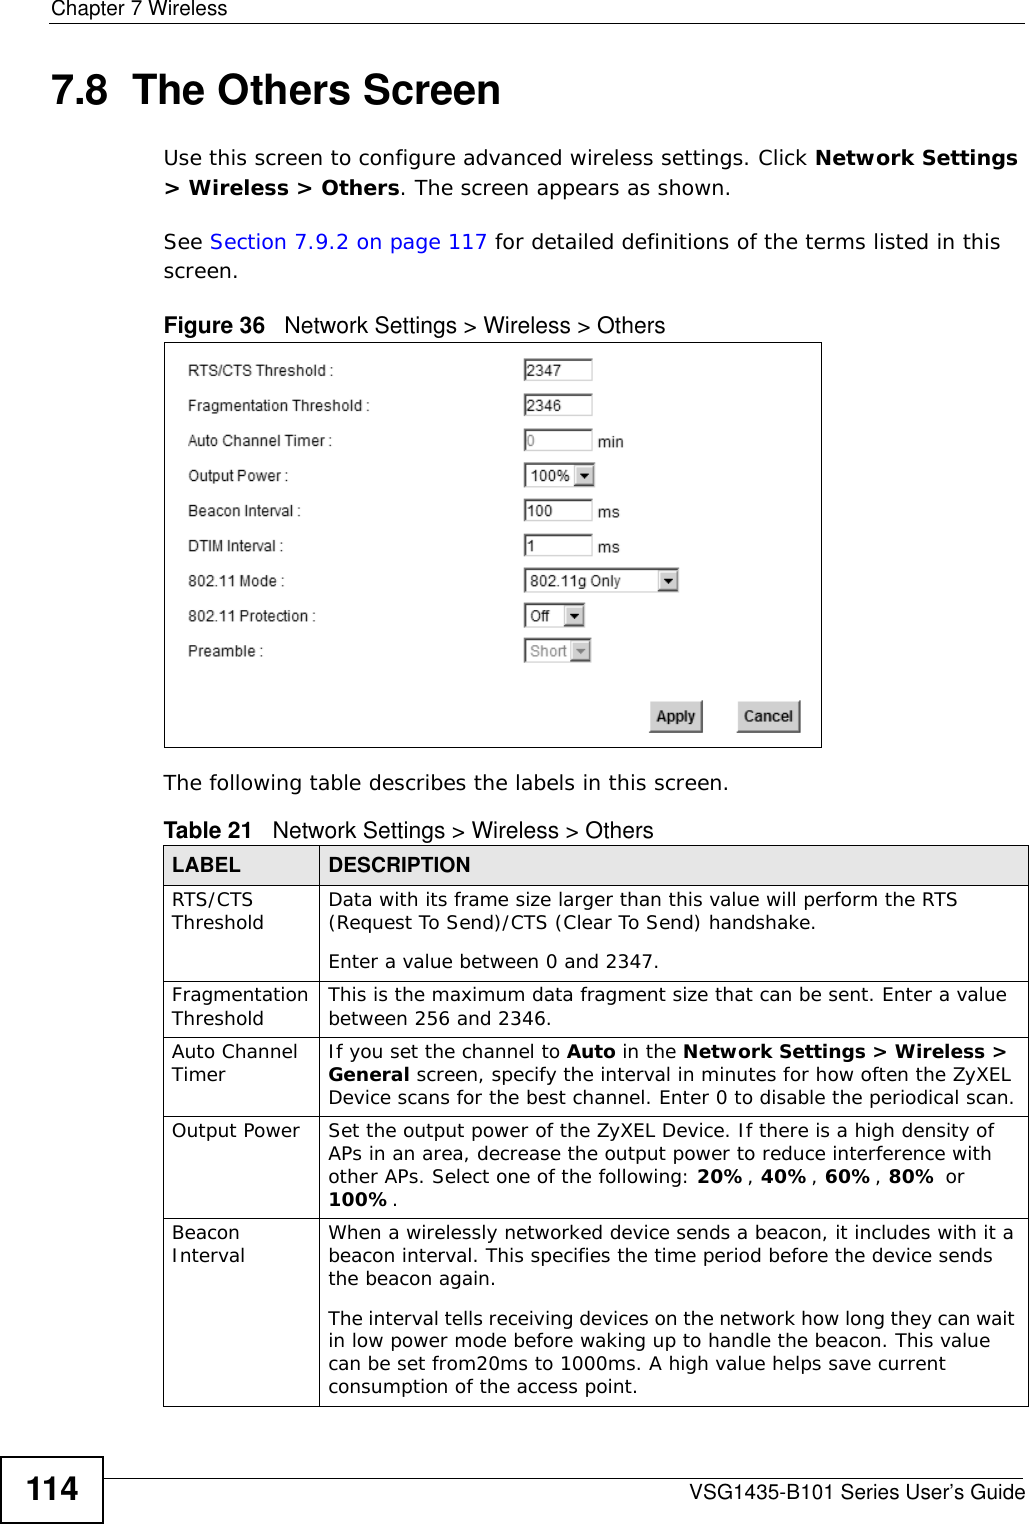 Chapter 7 WirelessVSG1435-B101 Series User’s Guide1147.8  The Others ScreenUse this screen to configure advanced wireless settings. Click Network Settings &gt; Wireless &gt; Others. The screen appears as shown.See Section 7.9.2 on page 117 for detailed definitions of the terms listed in this screen.Figure 36   Network Settings &gt; Wireless &gt; OthersThe following table describes the labels in this screen. Table 21   Network Settings &gt; Wireless &gt; OthersLABEL DESCRIPTIONRTS/CTS Threshold Data with its frame size larger than this value will perform the RTS (Request To Send)/CTS (Clear To Send) handshake. Enter a value between 0 and 2347. Fragmentation Threshold This is the maximum data fragment size that can be sent. Enter a value between 256 and 2346. Auto Channel Timer If you set the channel to Auto in the Network Settings &gt; Wireless &gt; General screen, specify the interval in minutes for how often the ZyXEL Device scans for the best channel. Enter 0 to disable the periodical scan.Output Power Set the output power of the ZyXEL Device. If there is a high density of APs in an area, decrease the output power to reduce interference with other APs. Select one of the following: 20%, 40%, 60%, 80% or 100%. Beacon Interval When a wirelessly networked device sends a beacon, it includes with it a beacon interval. This specifies the time period before the device sends the beacon again.The interval tells receiving devices on the network how long they can wait in low power mode before waking up to handle the beacon. This value can be set from20ms to 1000ms. A high value helps save current consumption of the access point.